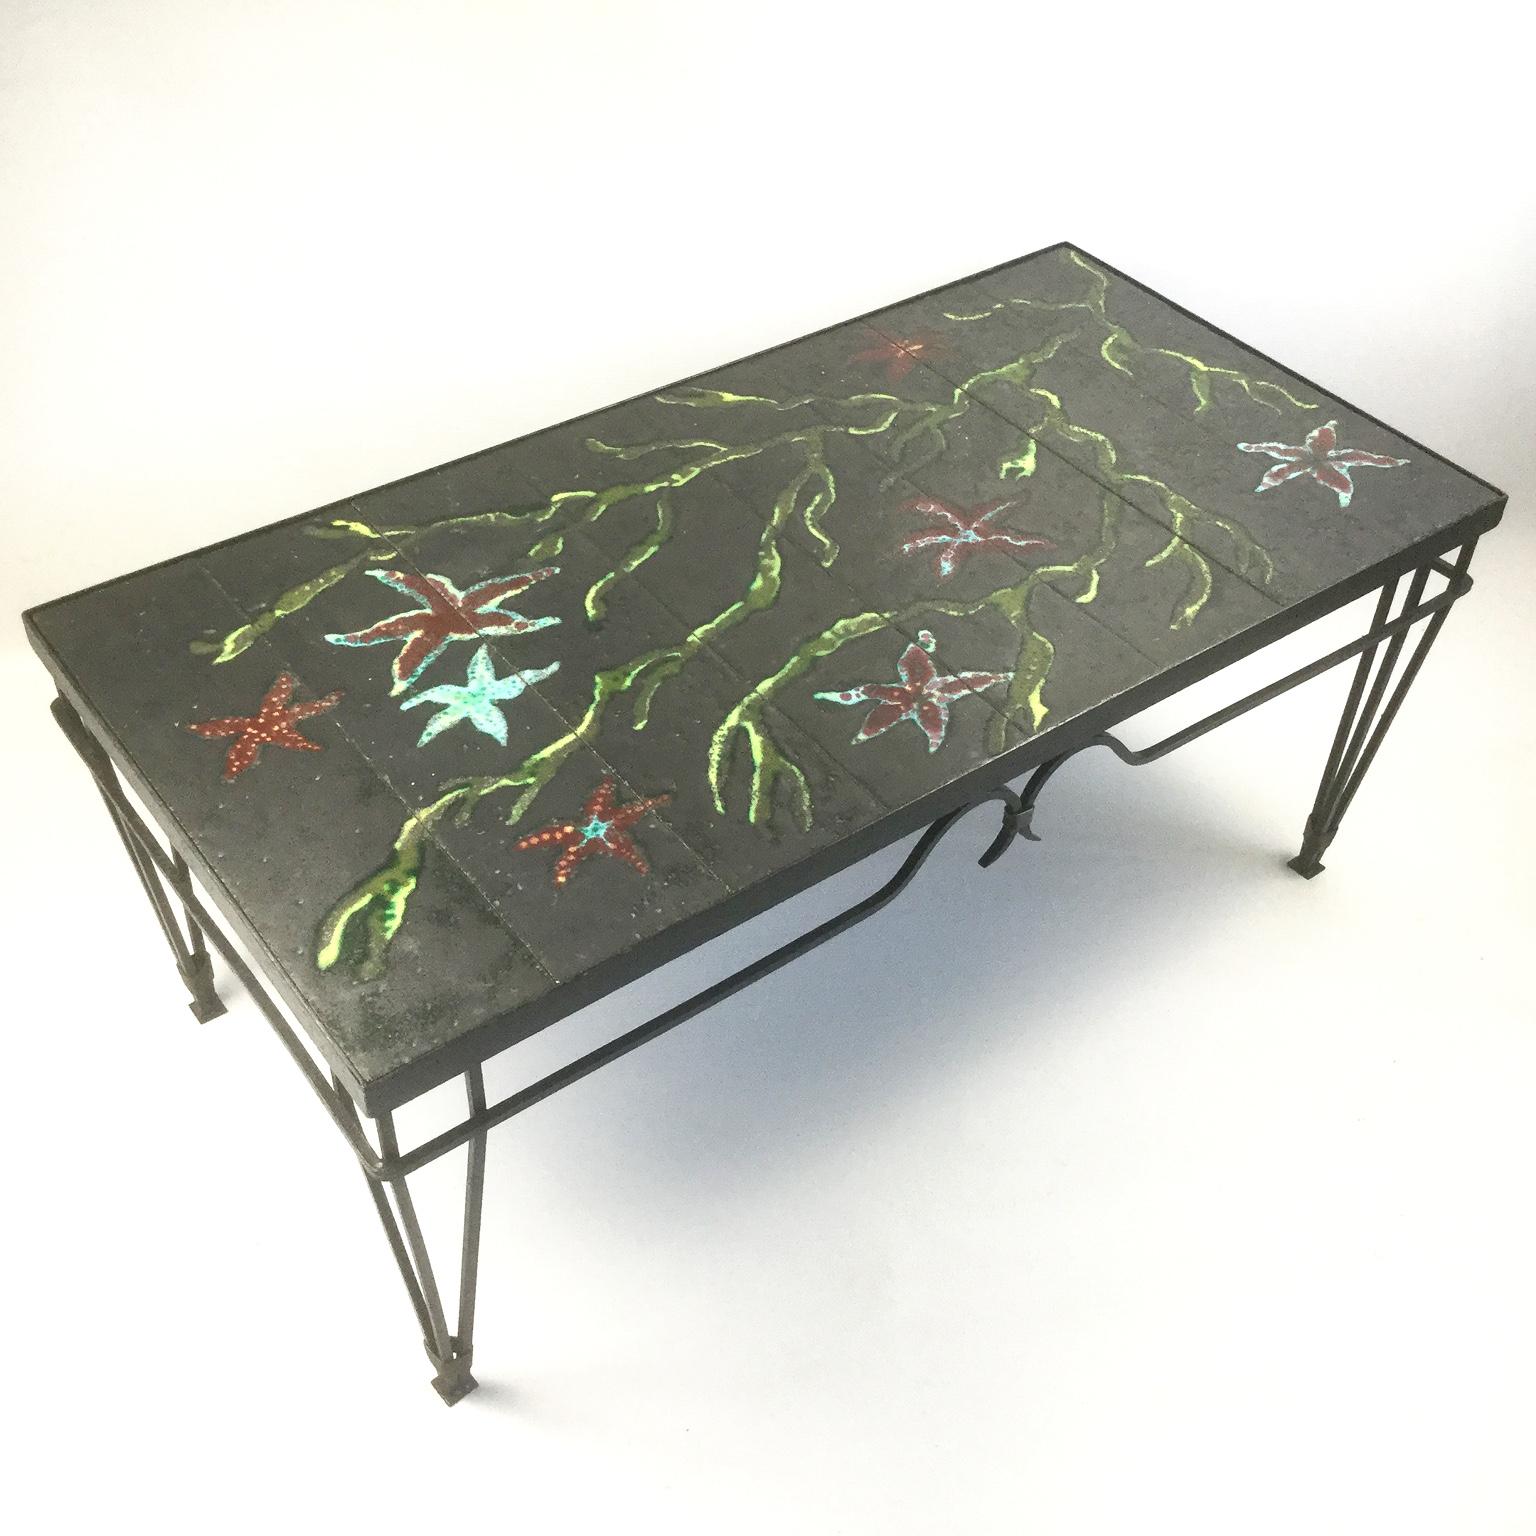 The 1940s wrought iron and lava enamel coffee table attributed to Jacques Adnet and Colette Gueden
Neoclassical wrought iron base with 8 enamel plaques created a marine decoration.